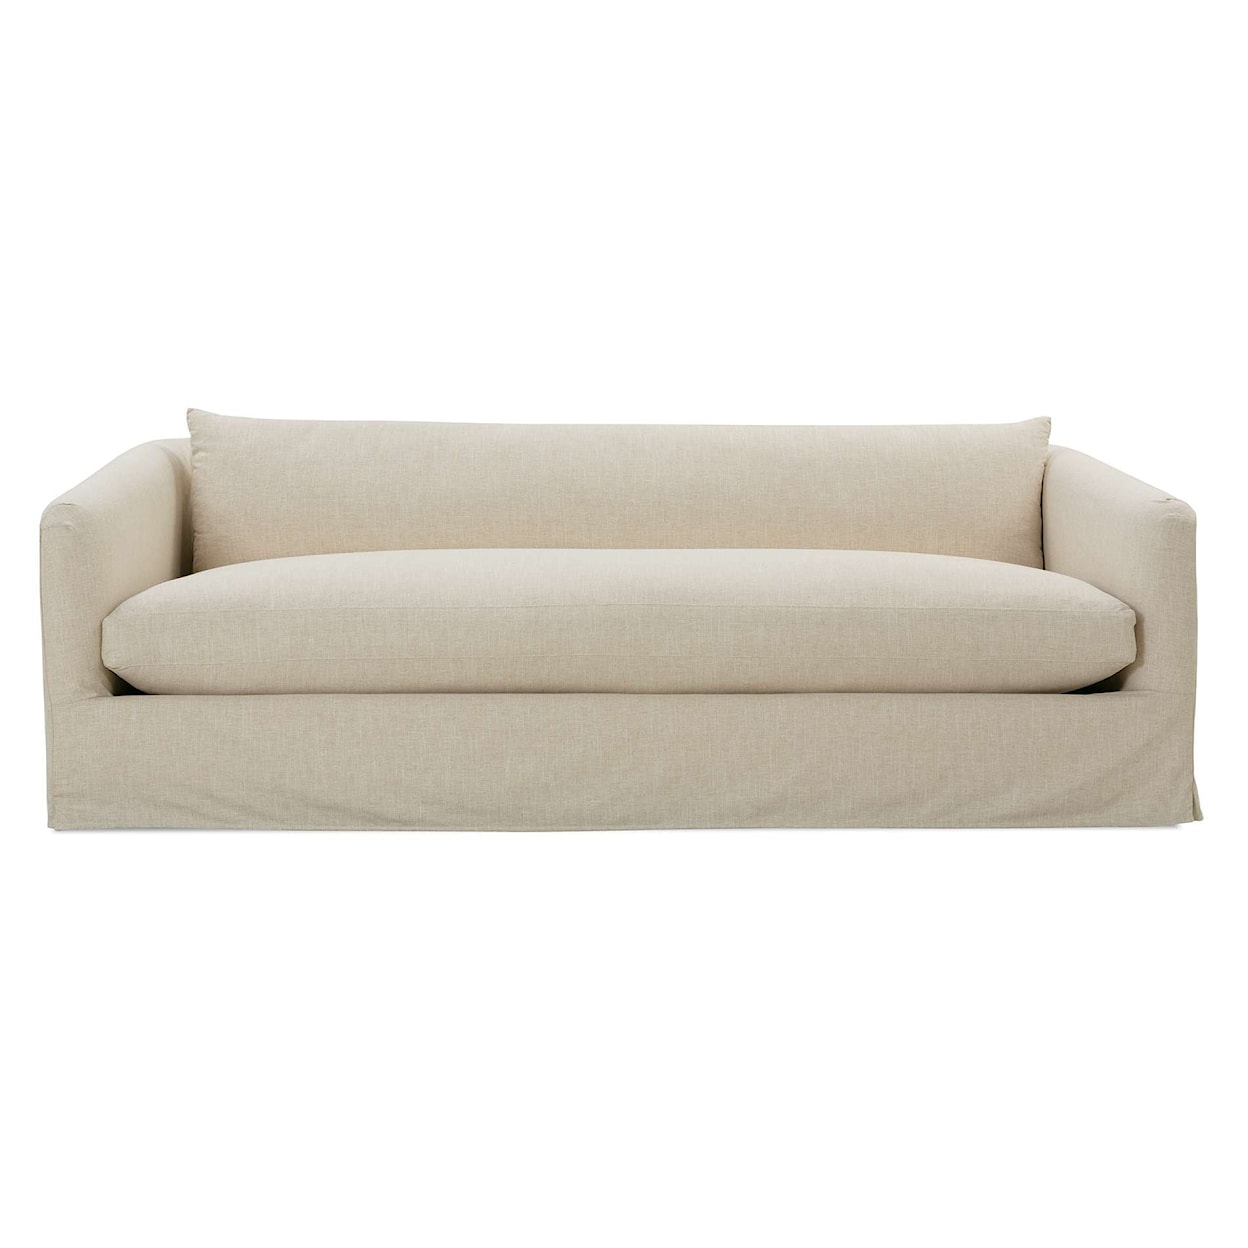 Robin Bruce Florence 96" Sofa with Slipcover